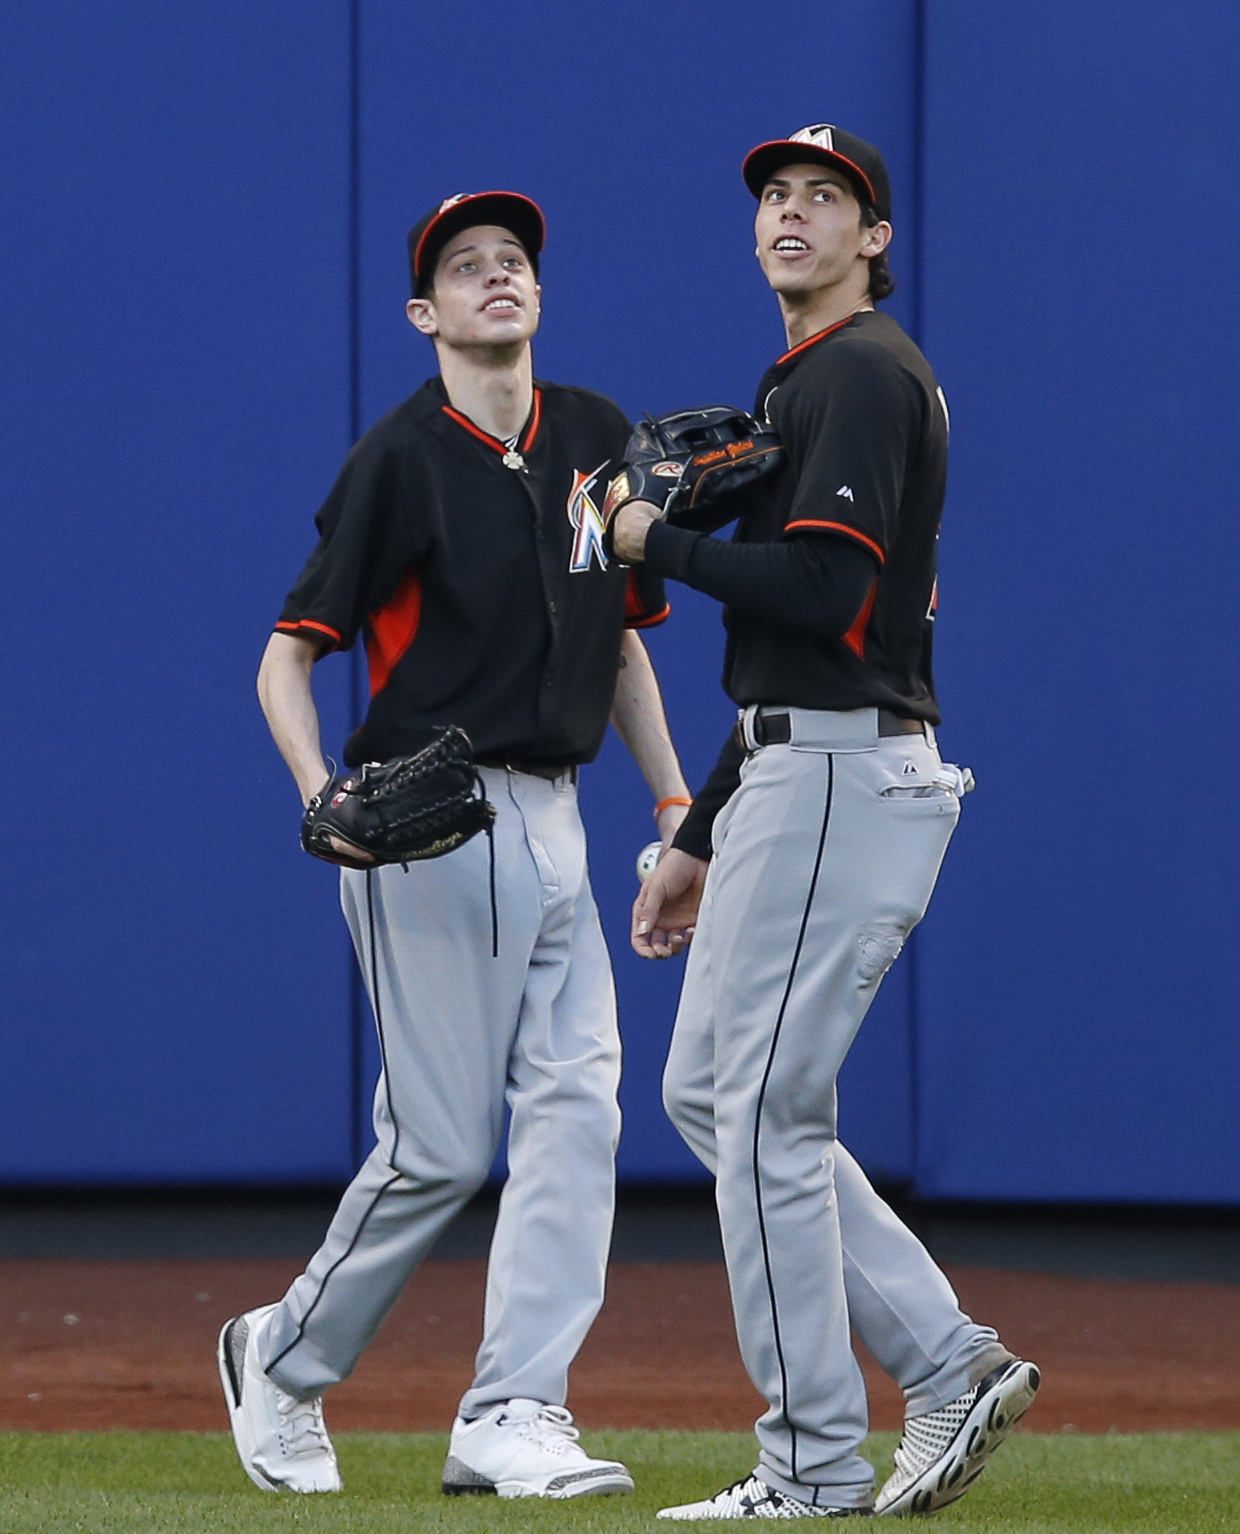 MLB notes: Marlins surprise Christian Yelich with lookalike from 'SNL